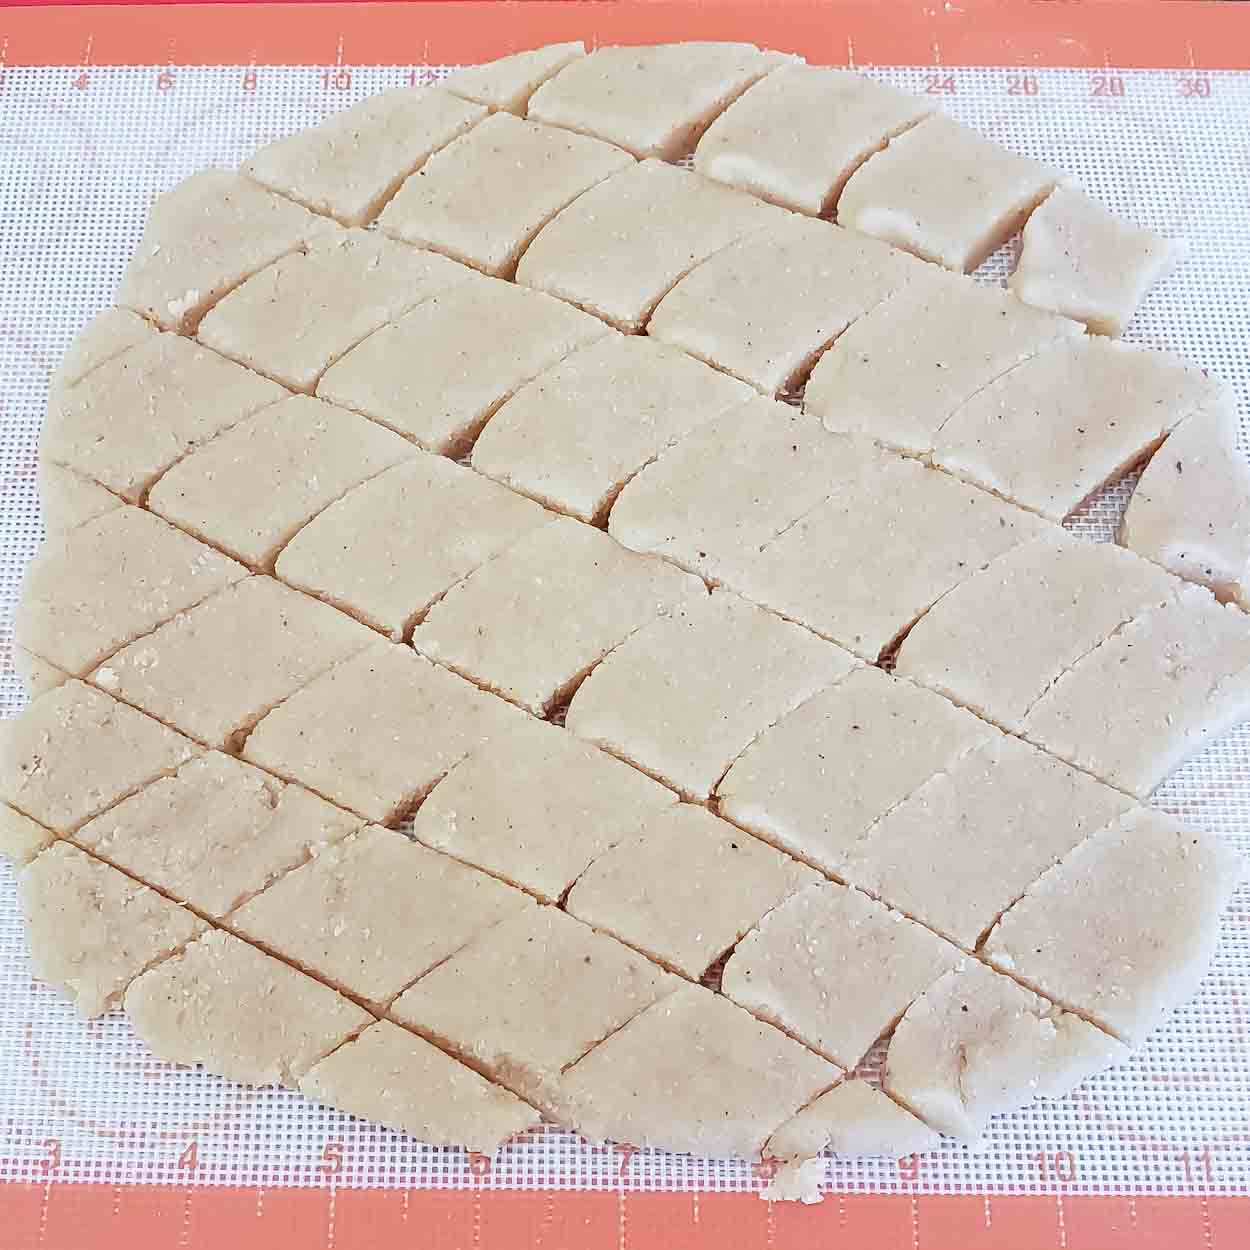 Cut the rolled dough in desired shapes.